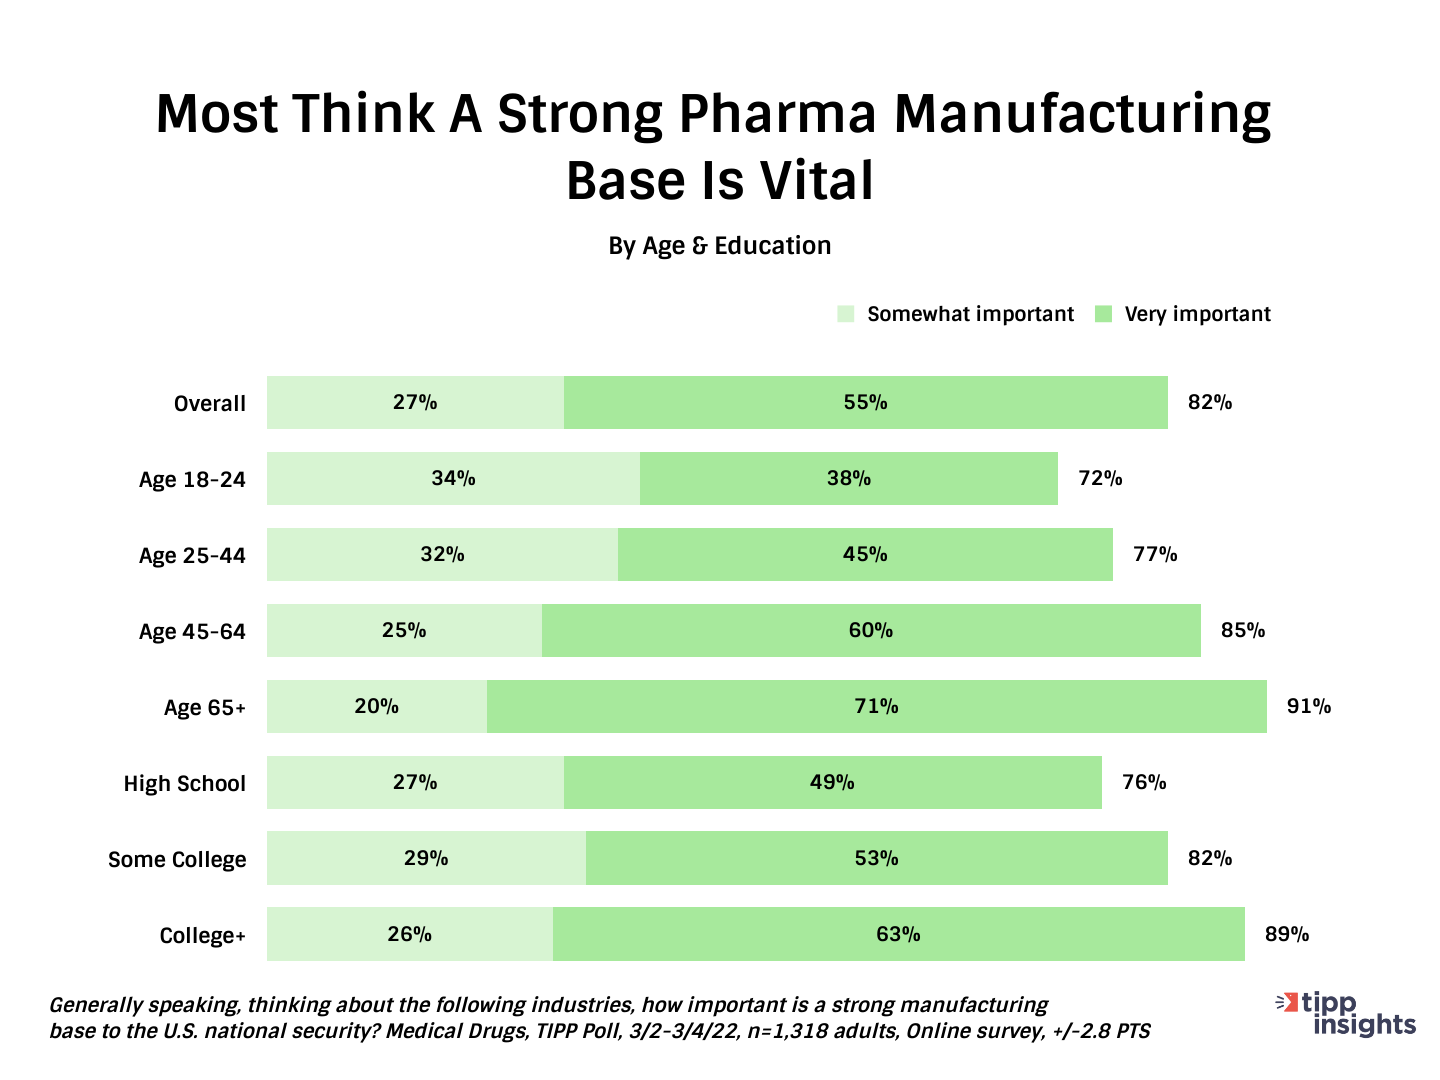 TIPP Poll Results: Most Americans think a strong pharmaceutical manufacturing base is vital